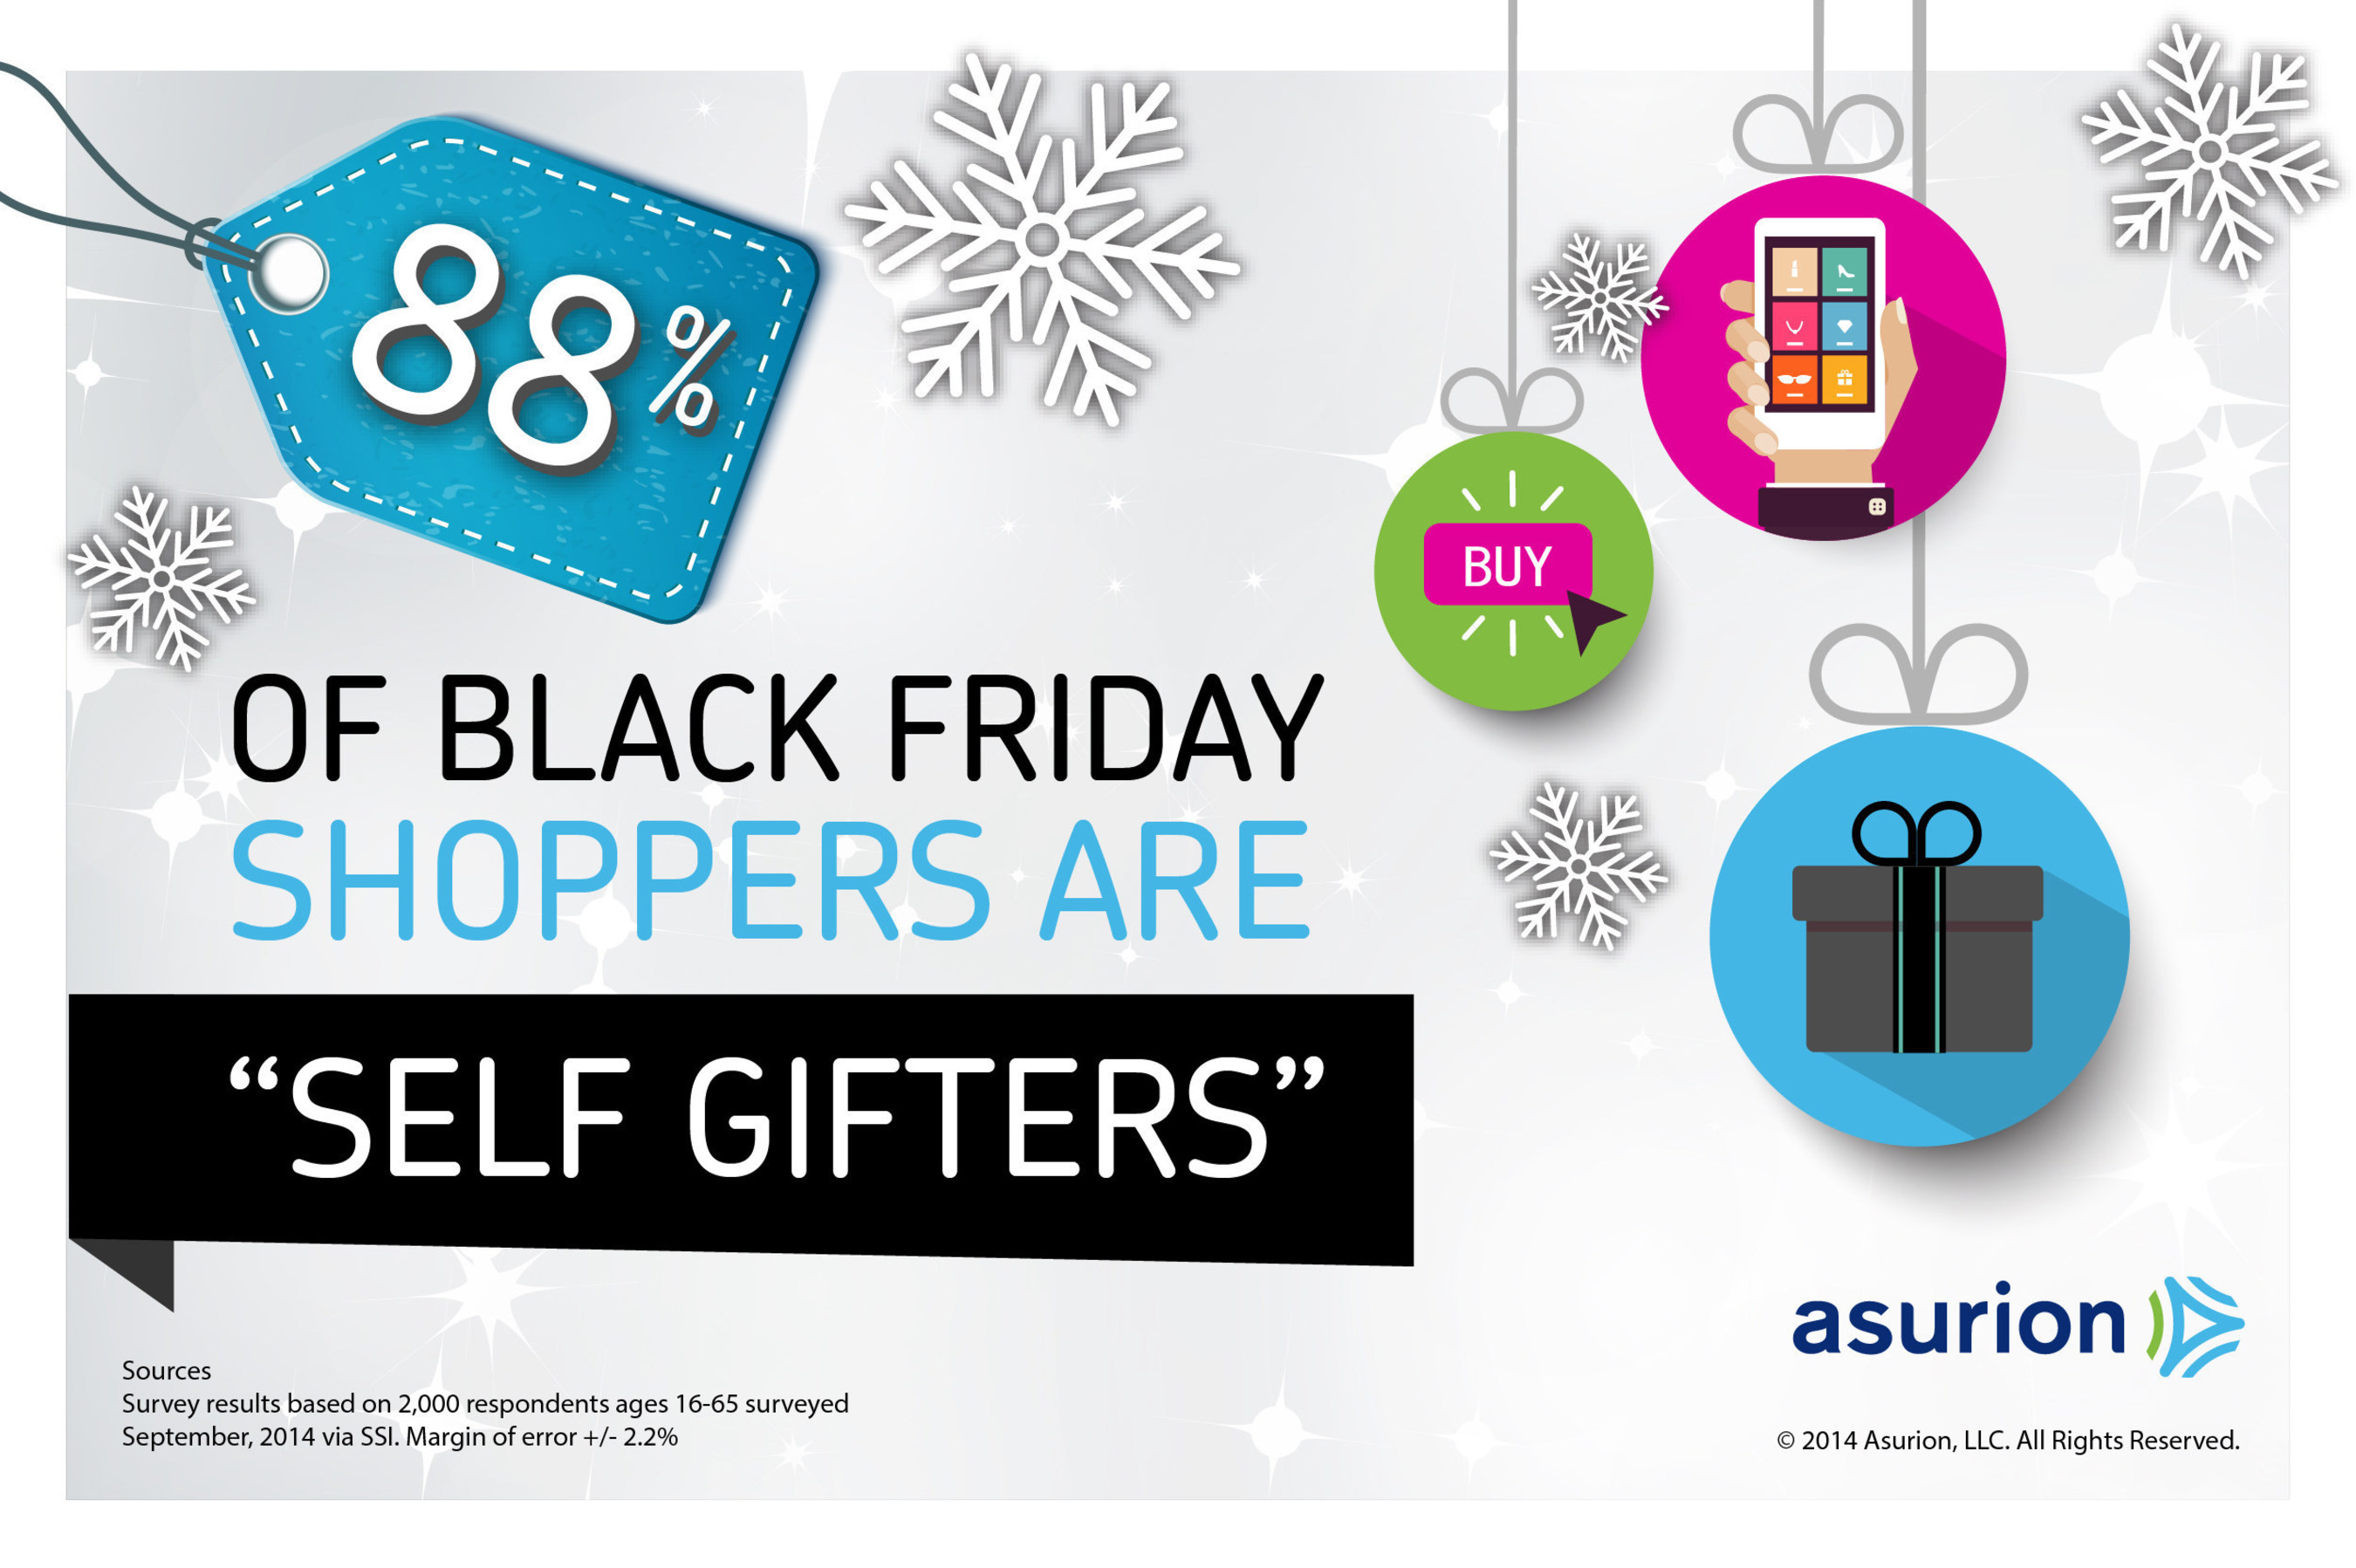 A recent survey by product protection leader Asurion found 88 percent of those who plan to shop on Black Friday are "self gifters." This trend may be because data also shows every day accidents can eat up those savings and leave gifts useless in less than a year - nearly a third of items bought last Black Friday have broken. Find tips on protecting purchases and reducing other holiday stress at http://blog.asurion.com/tag/holiday-2014/